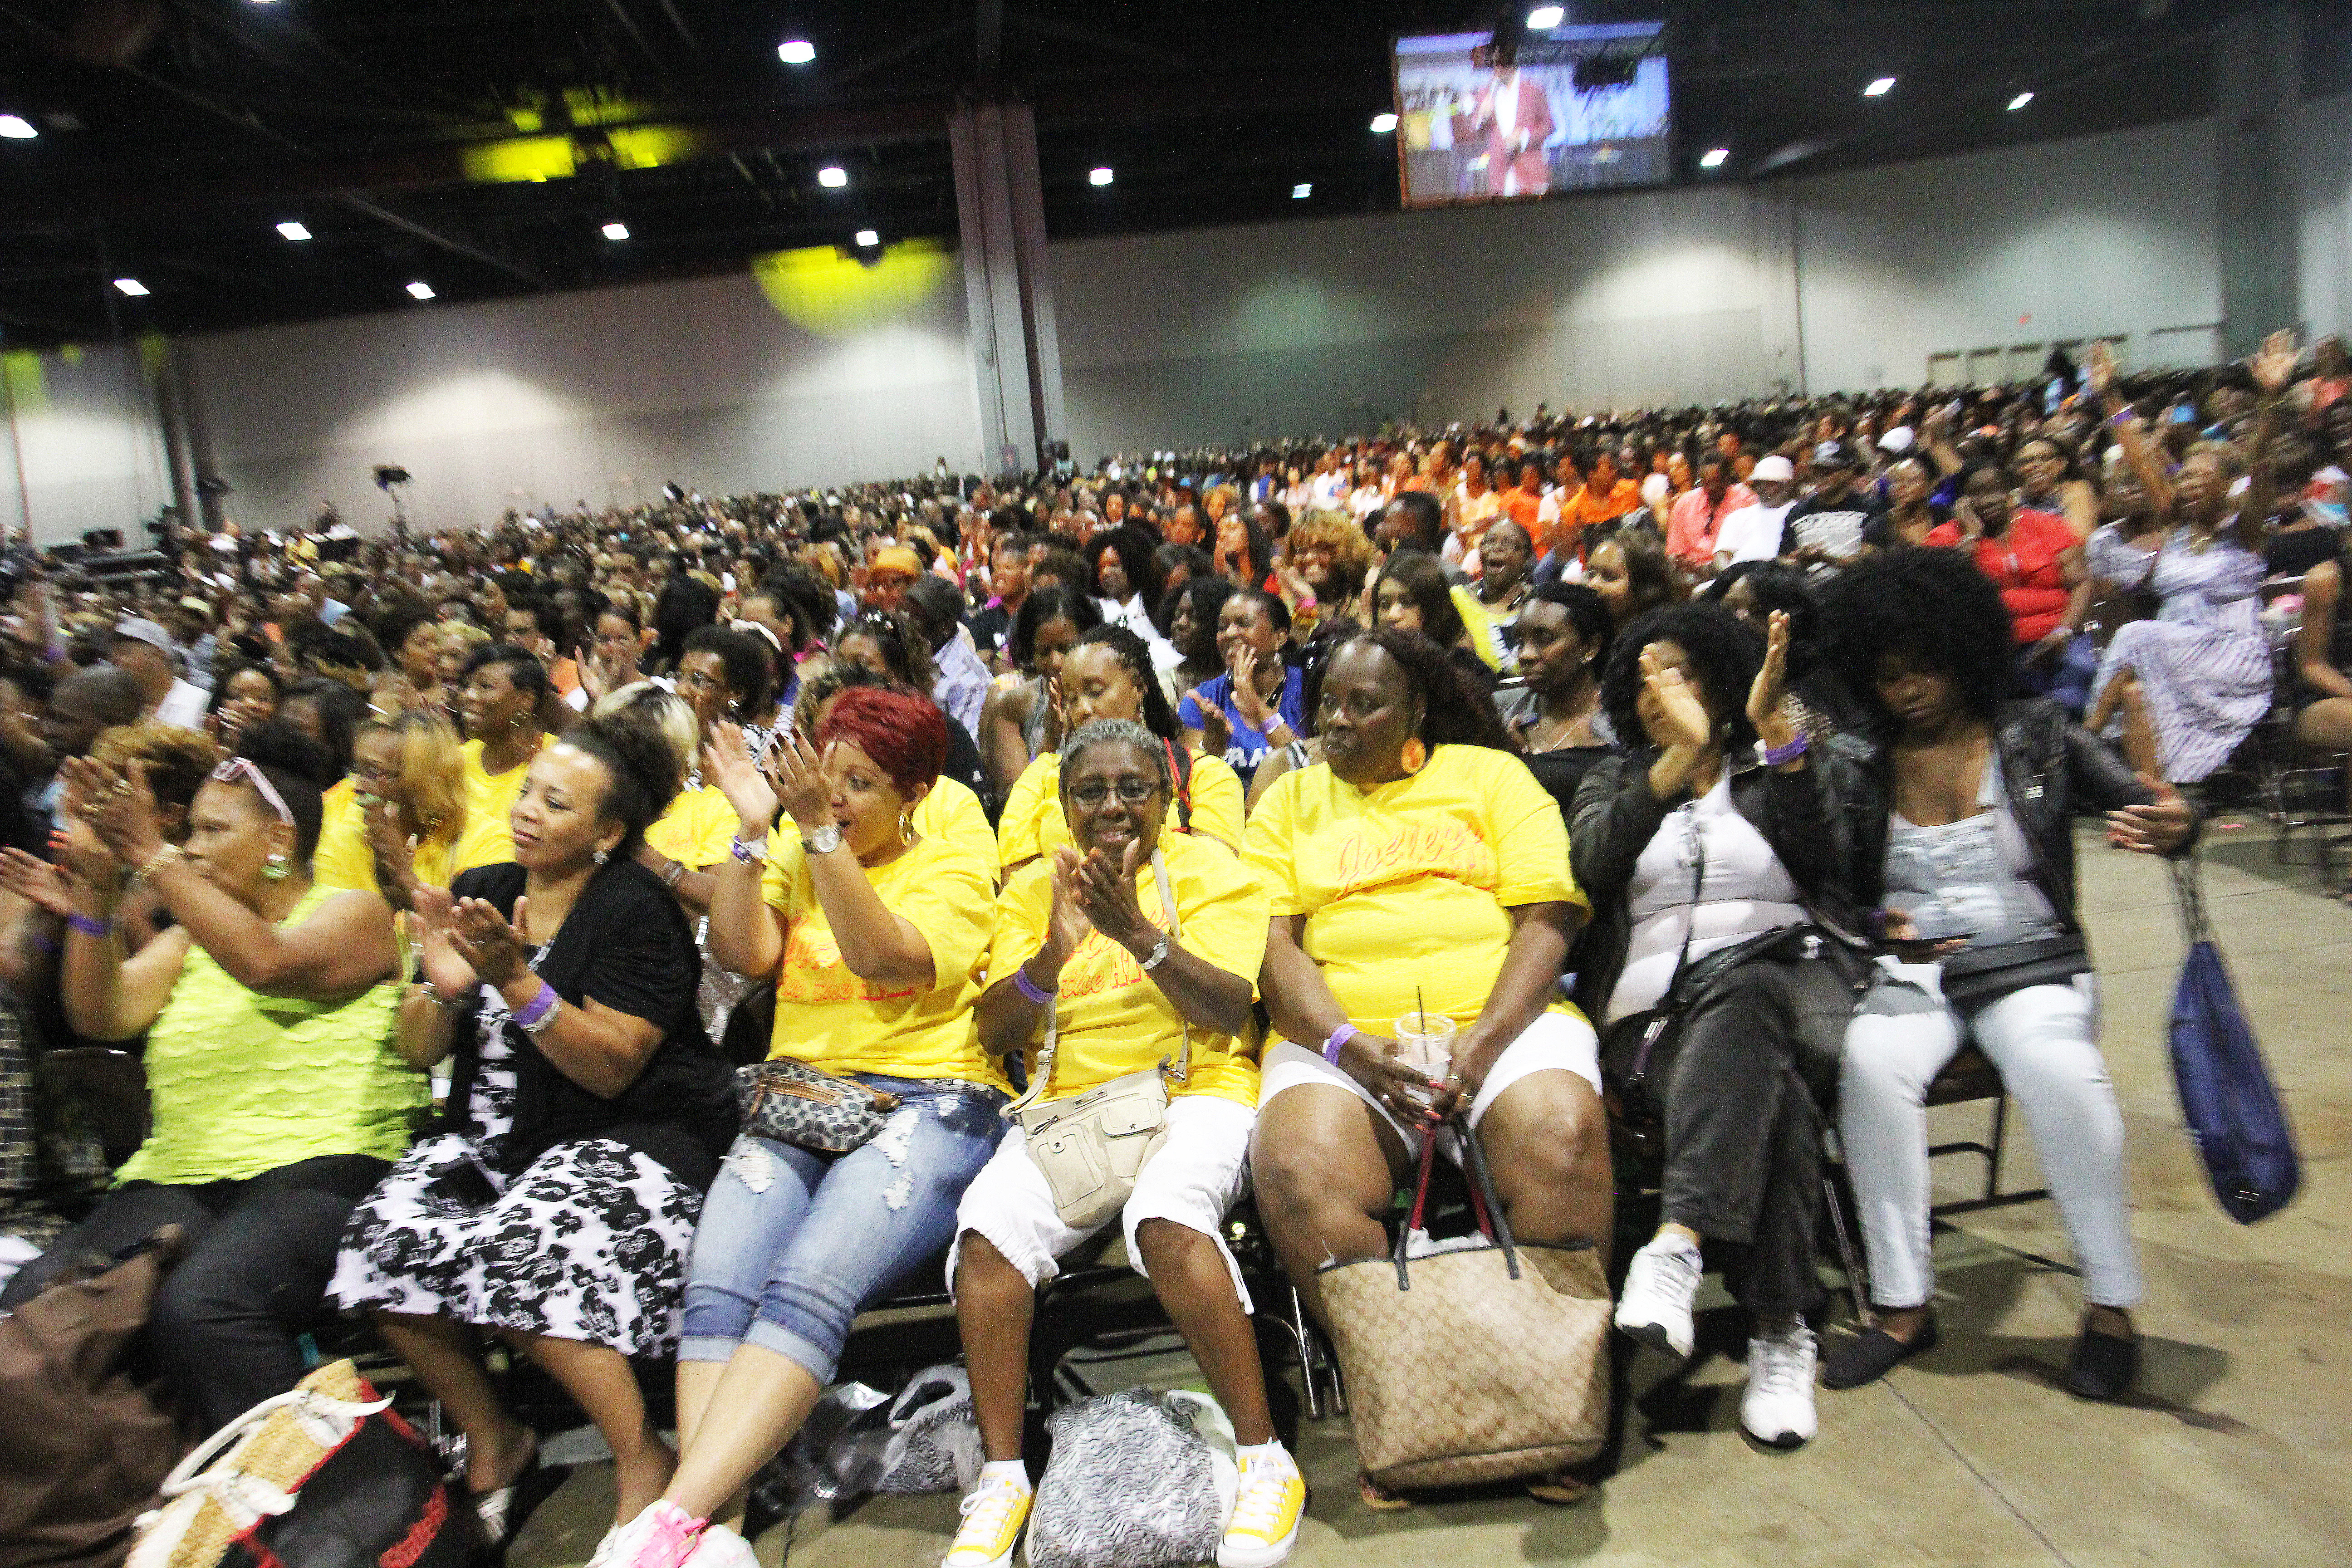 Audience filled the entire convention hall for Steve Harveys "Family Feud" at the Ford Neighborhood Awards weekend. 